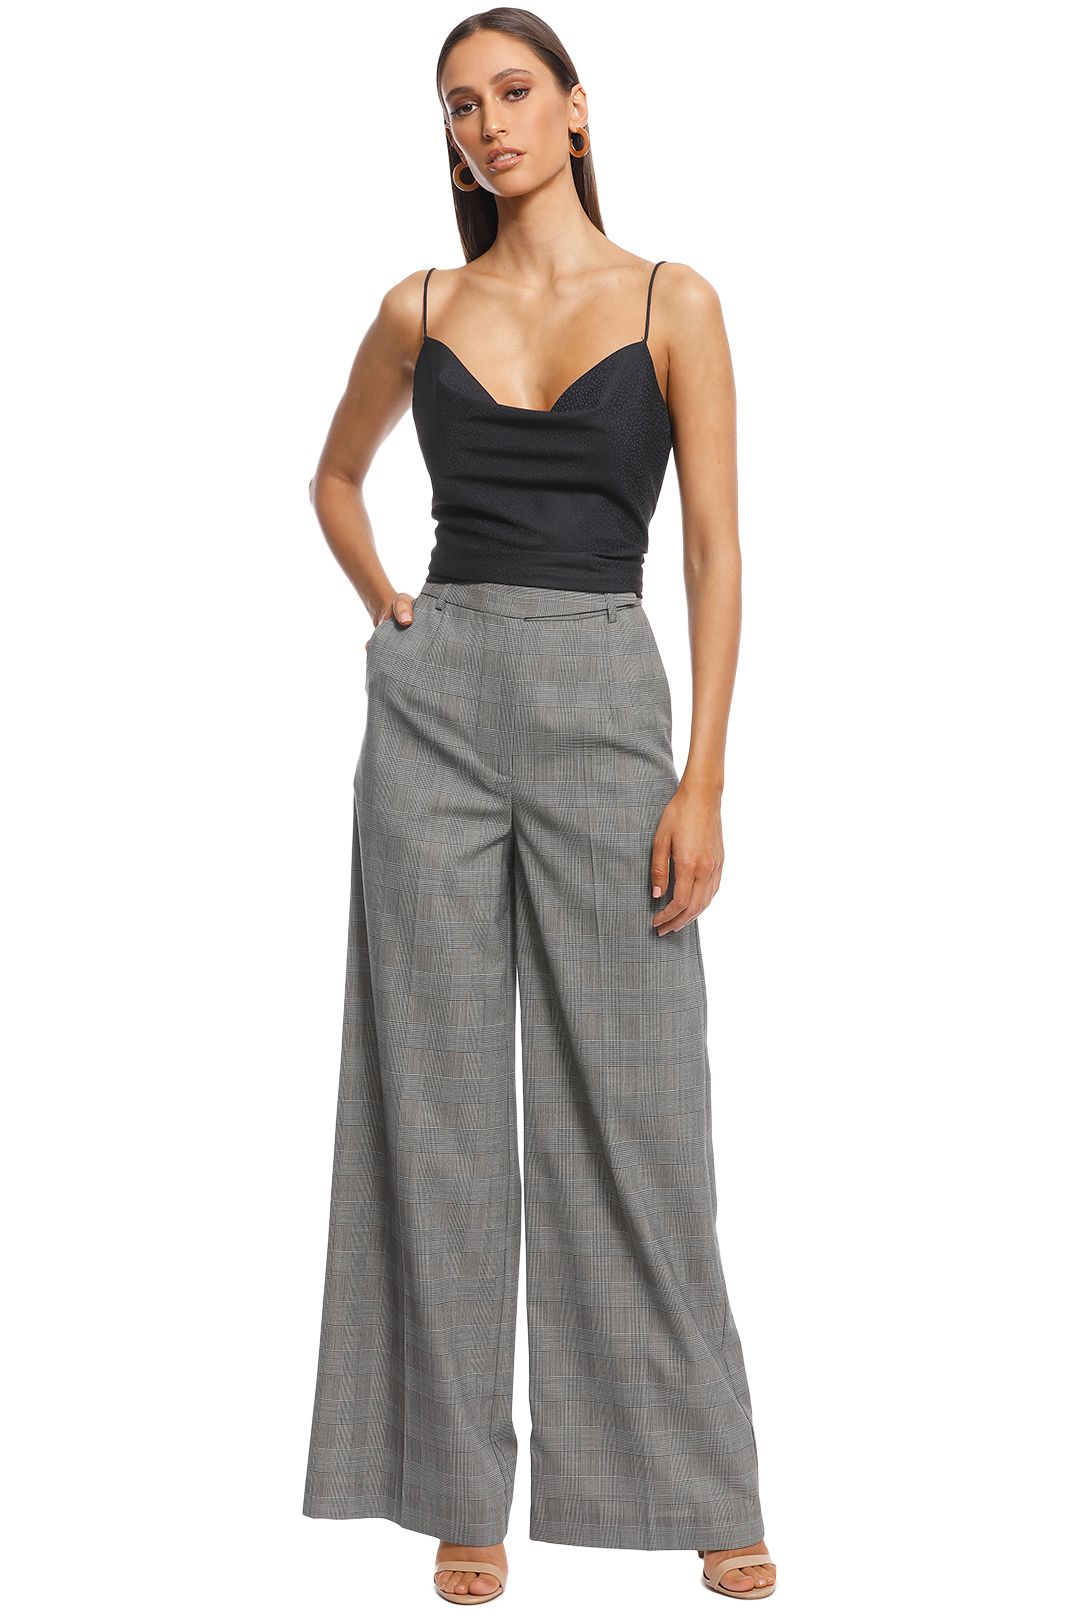 Camilla and Marc - Ackley Trouser - Grey - Front